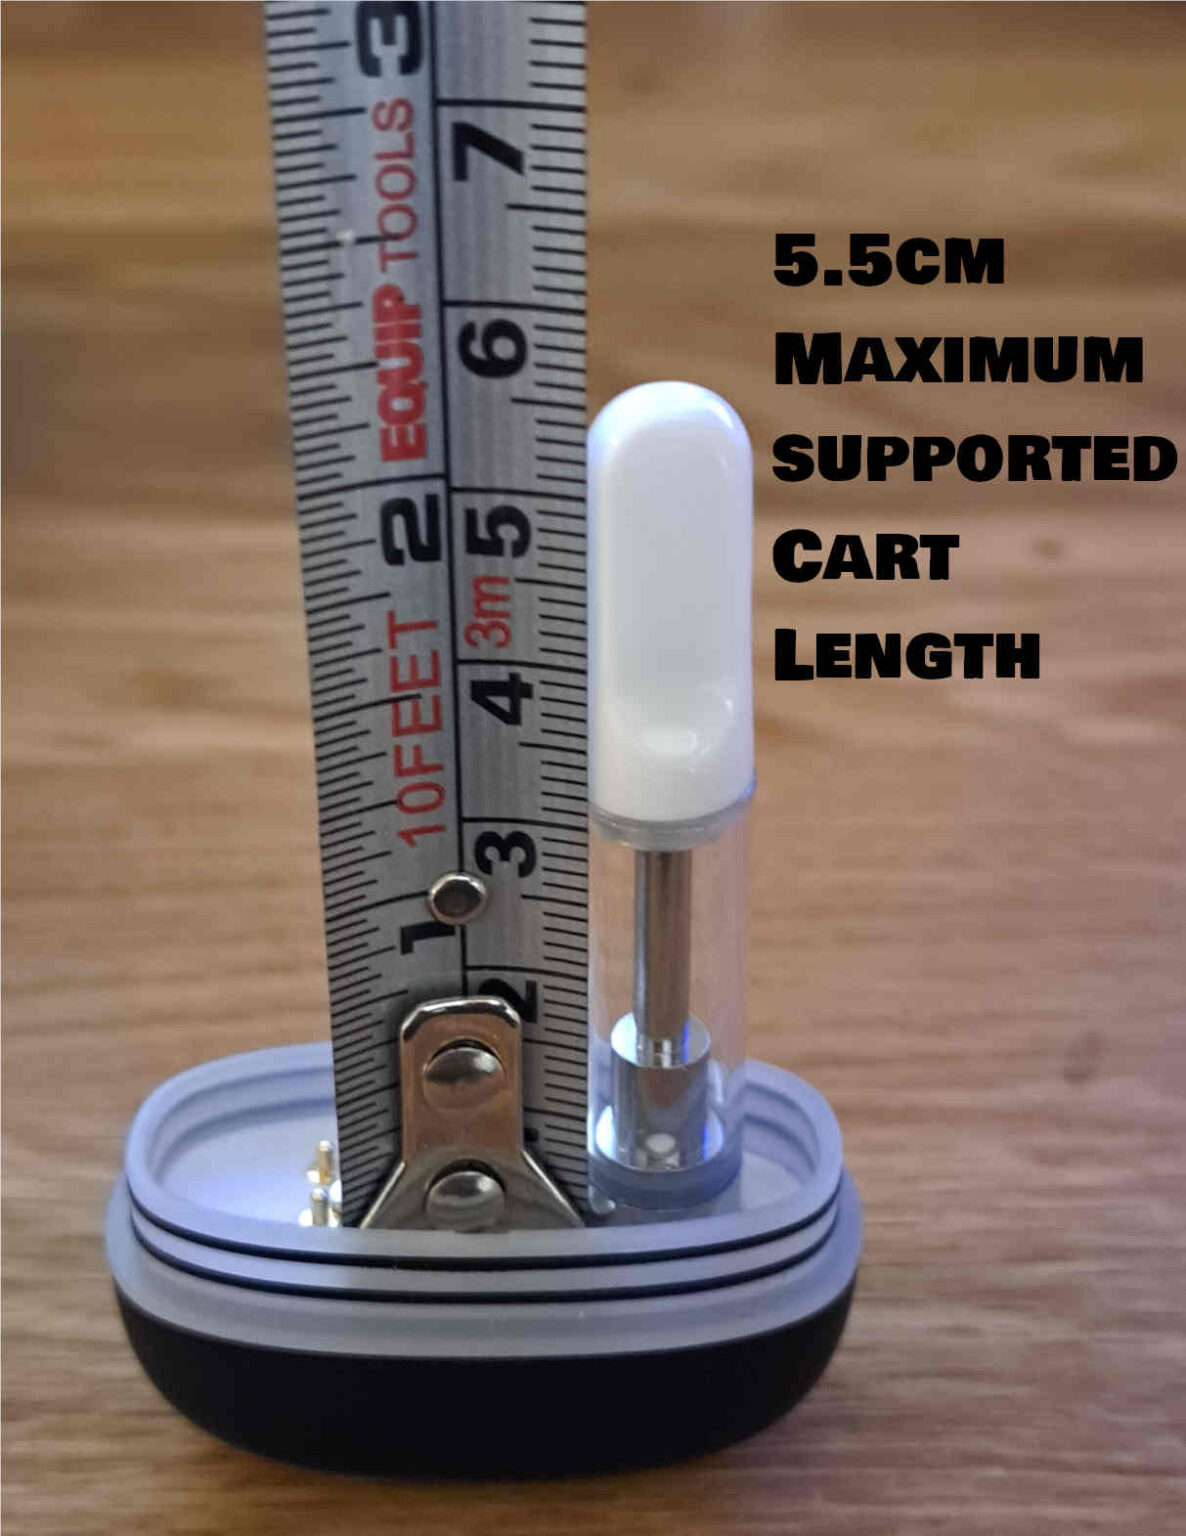 A CBS900 Battery with a maximum supported cart length of 5 cm.